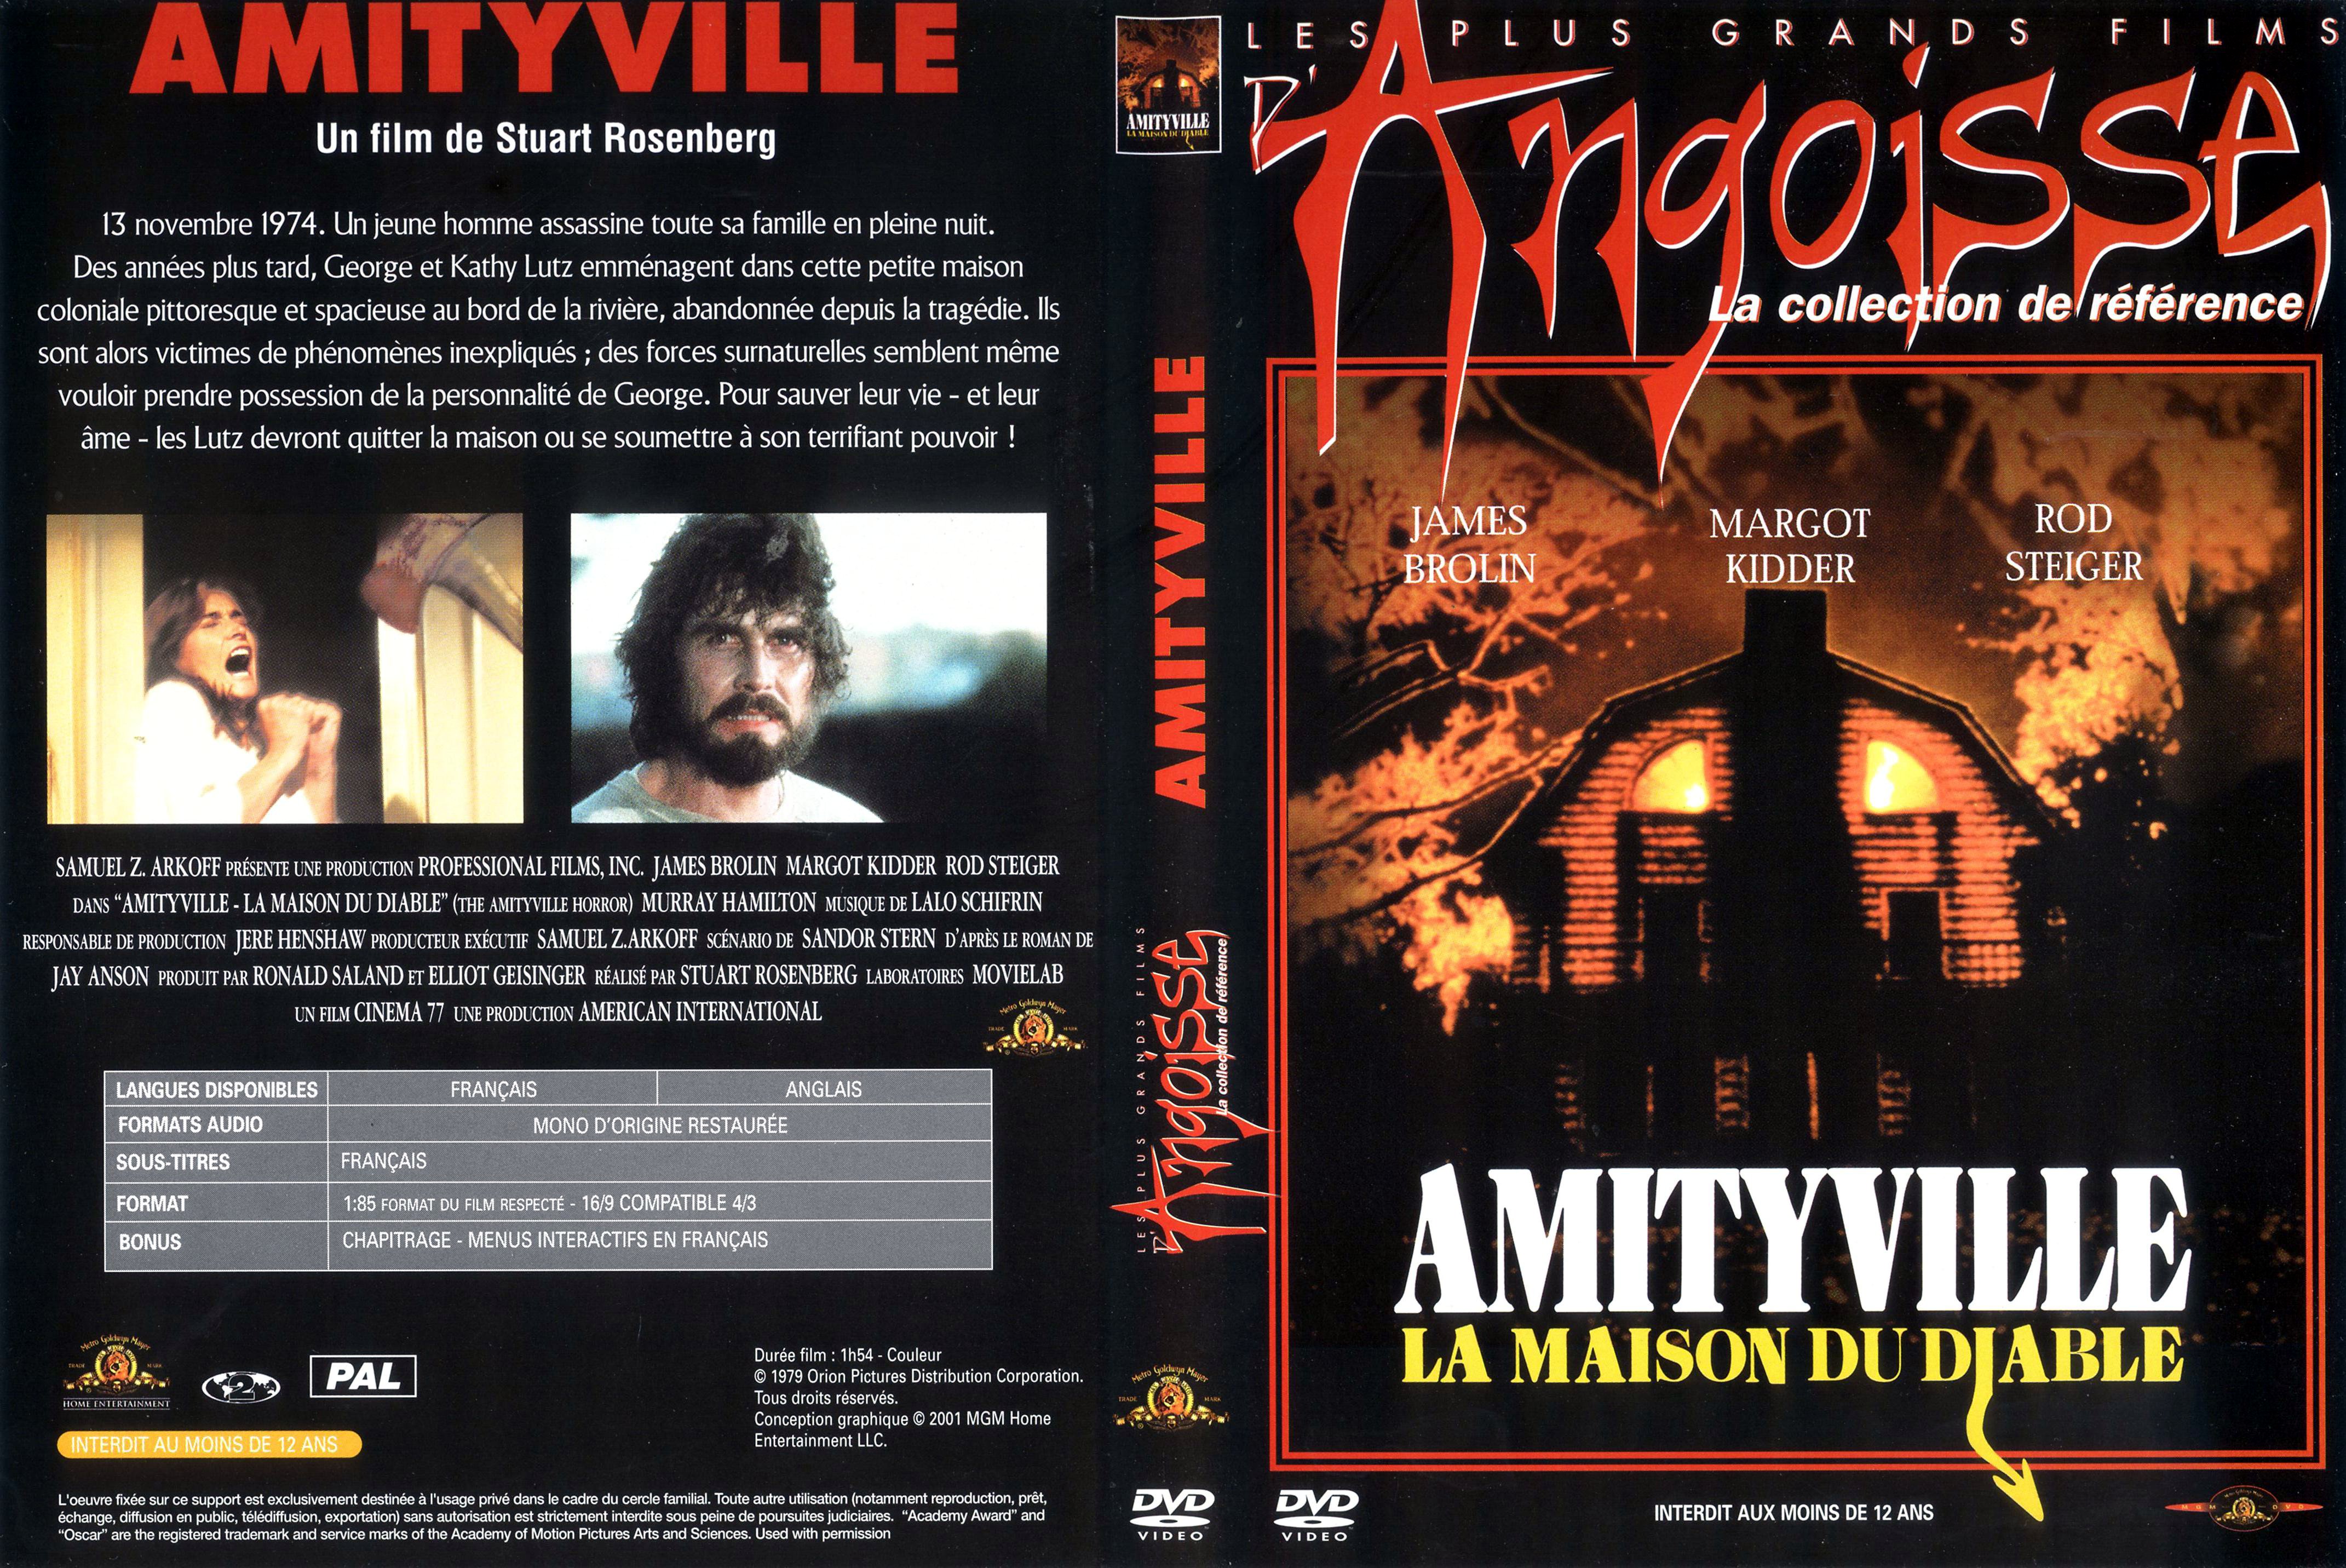 Jaquette DVD Amityville v3